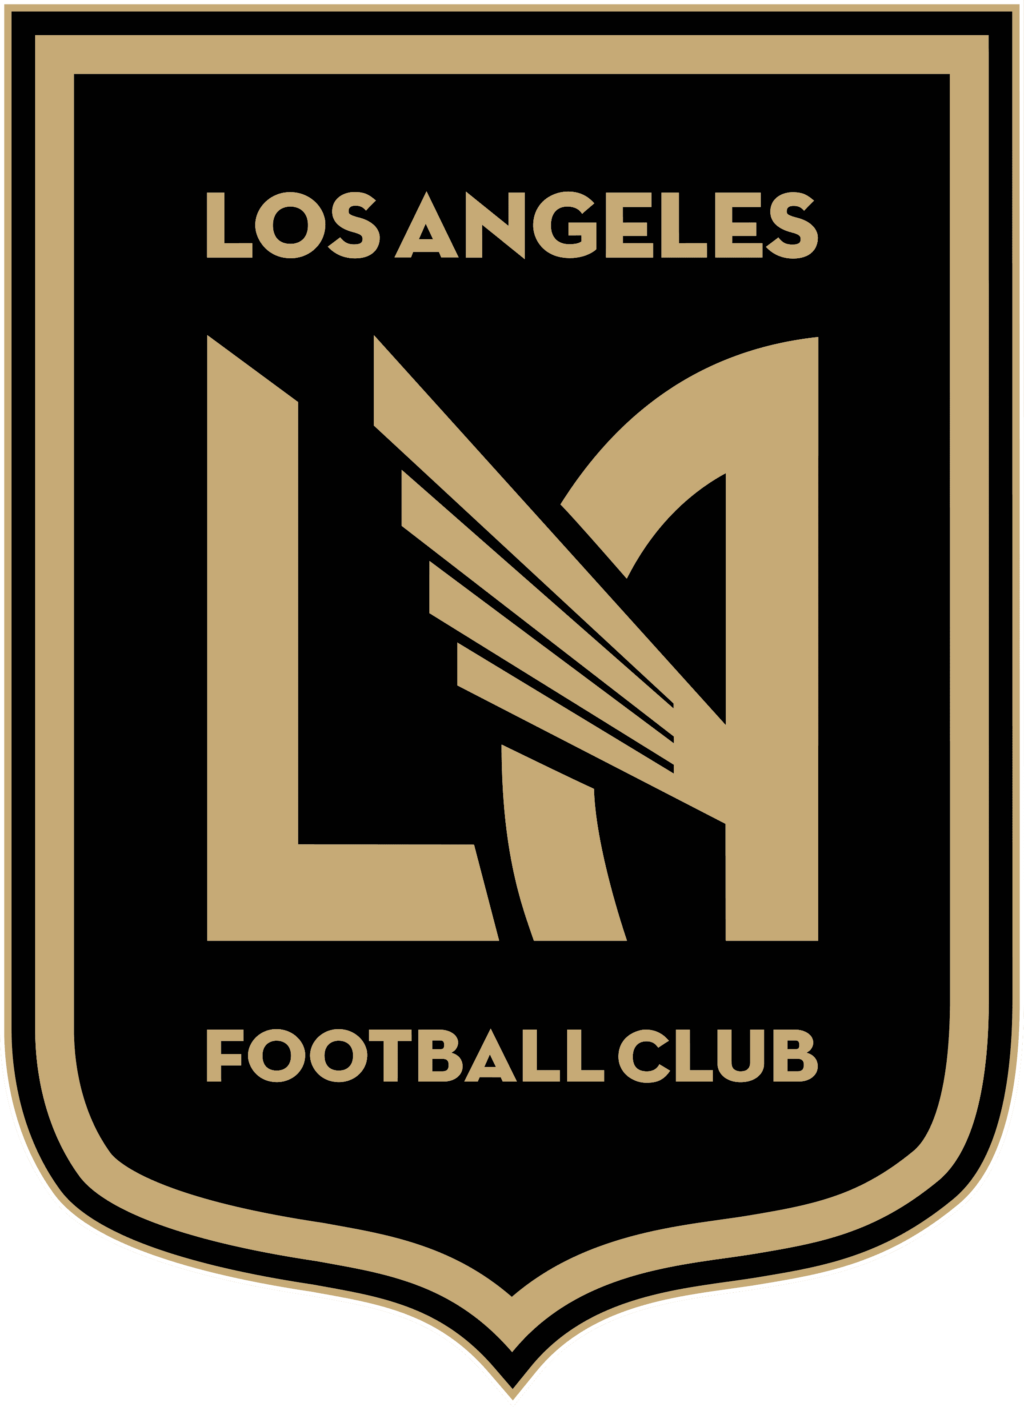 LAFC 01 MLS Logo LAFC (Los Angeles Football Club), LAFC SVG, Vector LAFC, Clipart LAFC, Football Kit LAFC, SVG, DXF, PNG, Soccer Logo Vector LAFC, EPS download MLS-files for silhouette, files for clipping.